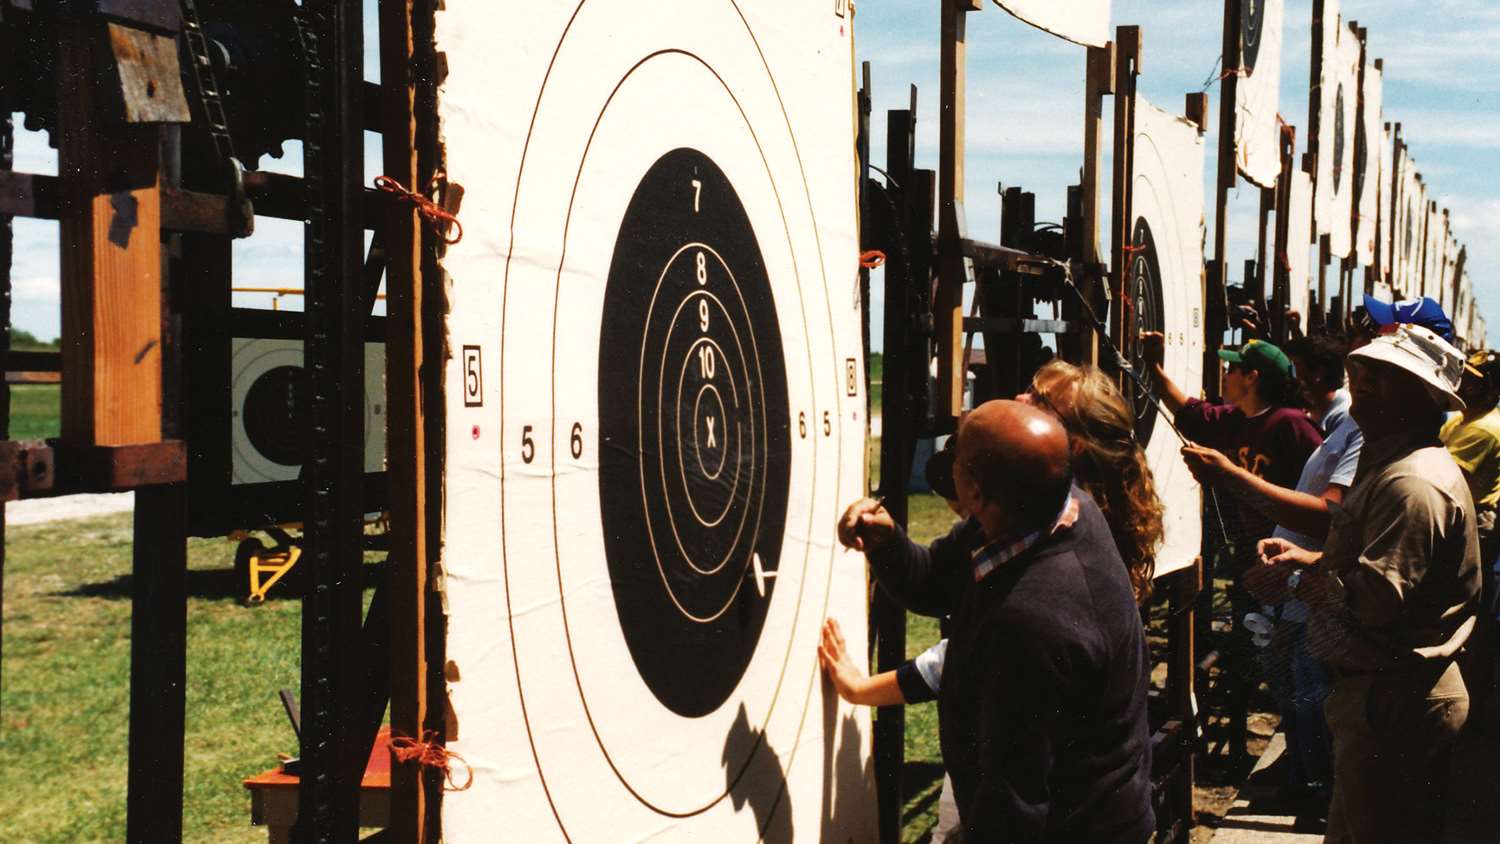 Camp Perry Pits at National Matches: NRA High Power Rifle 600-yard target.